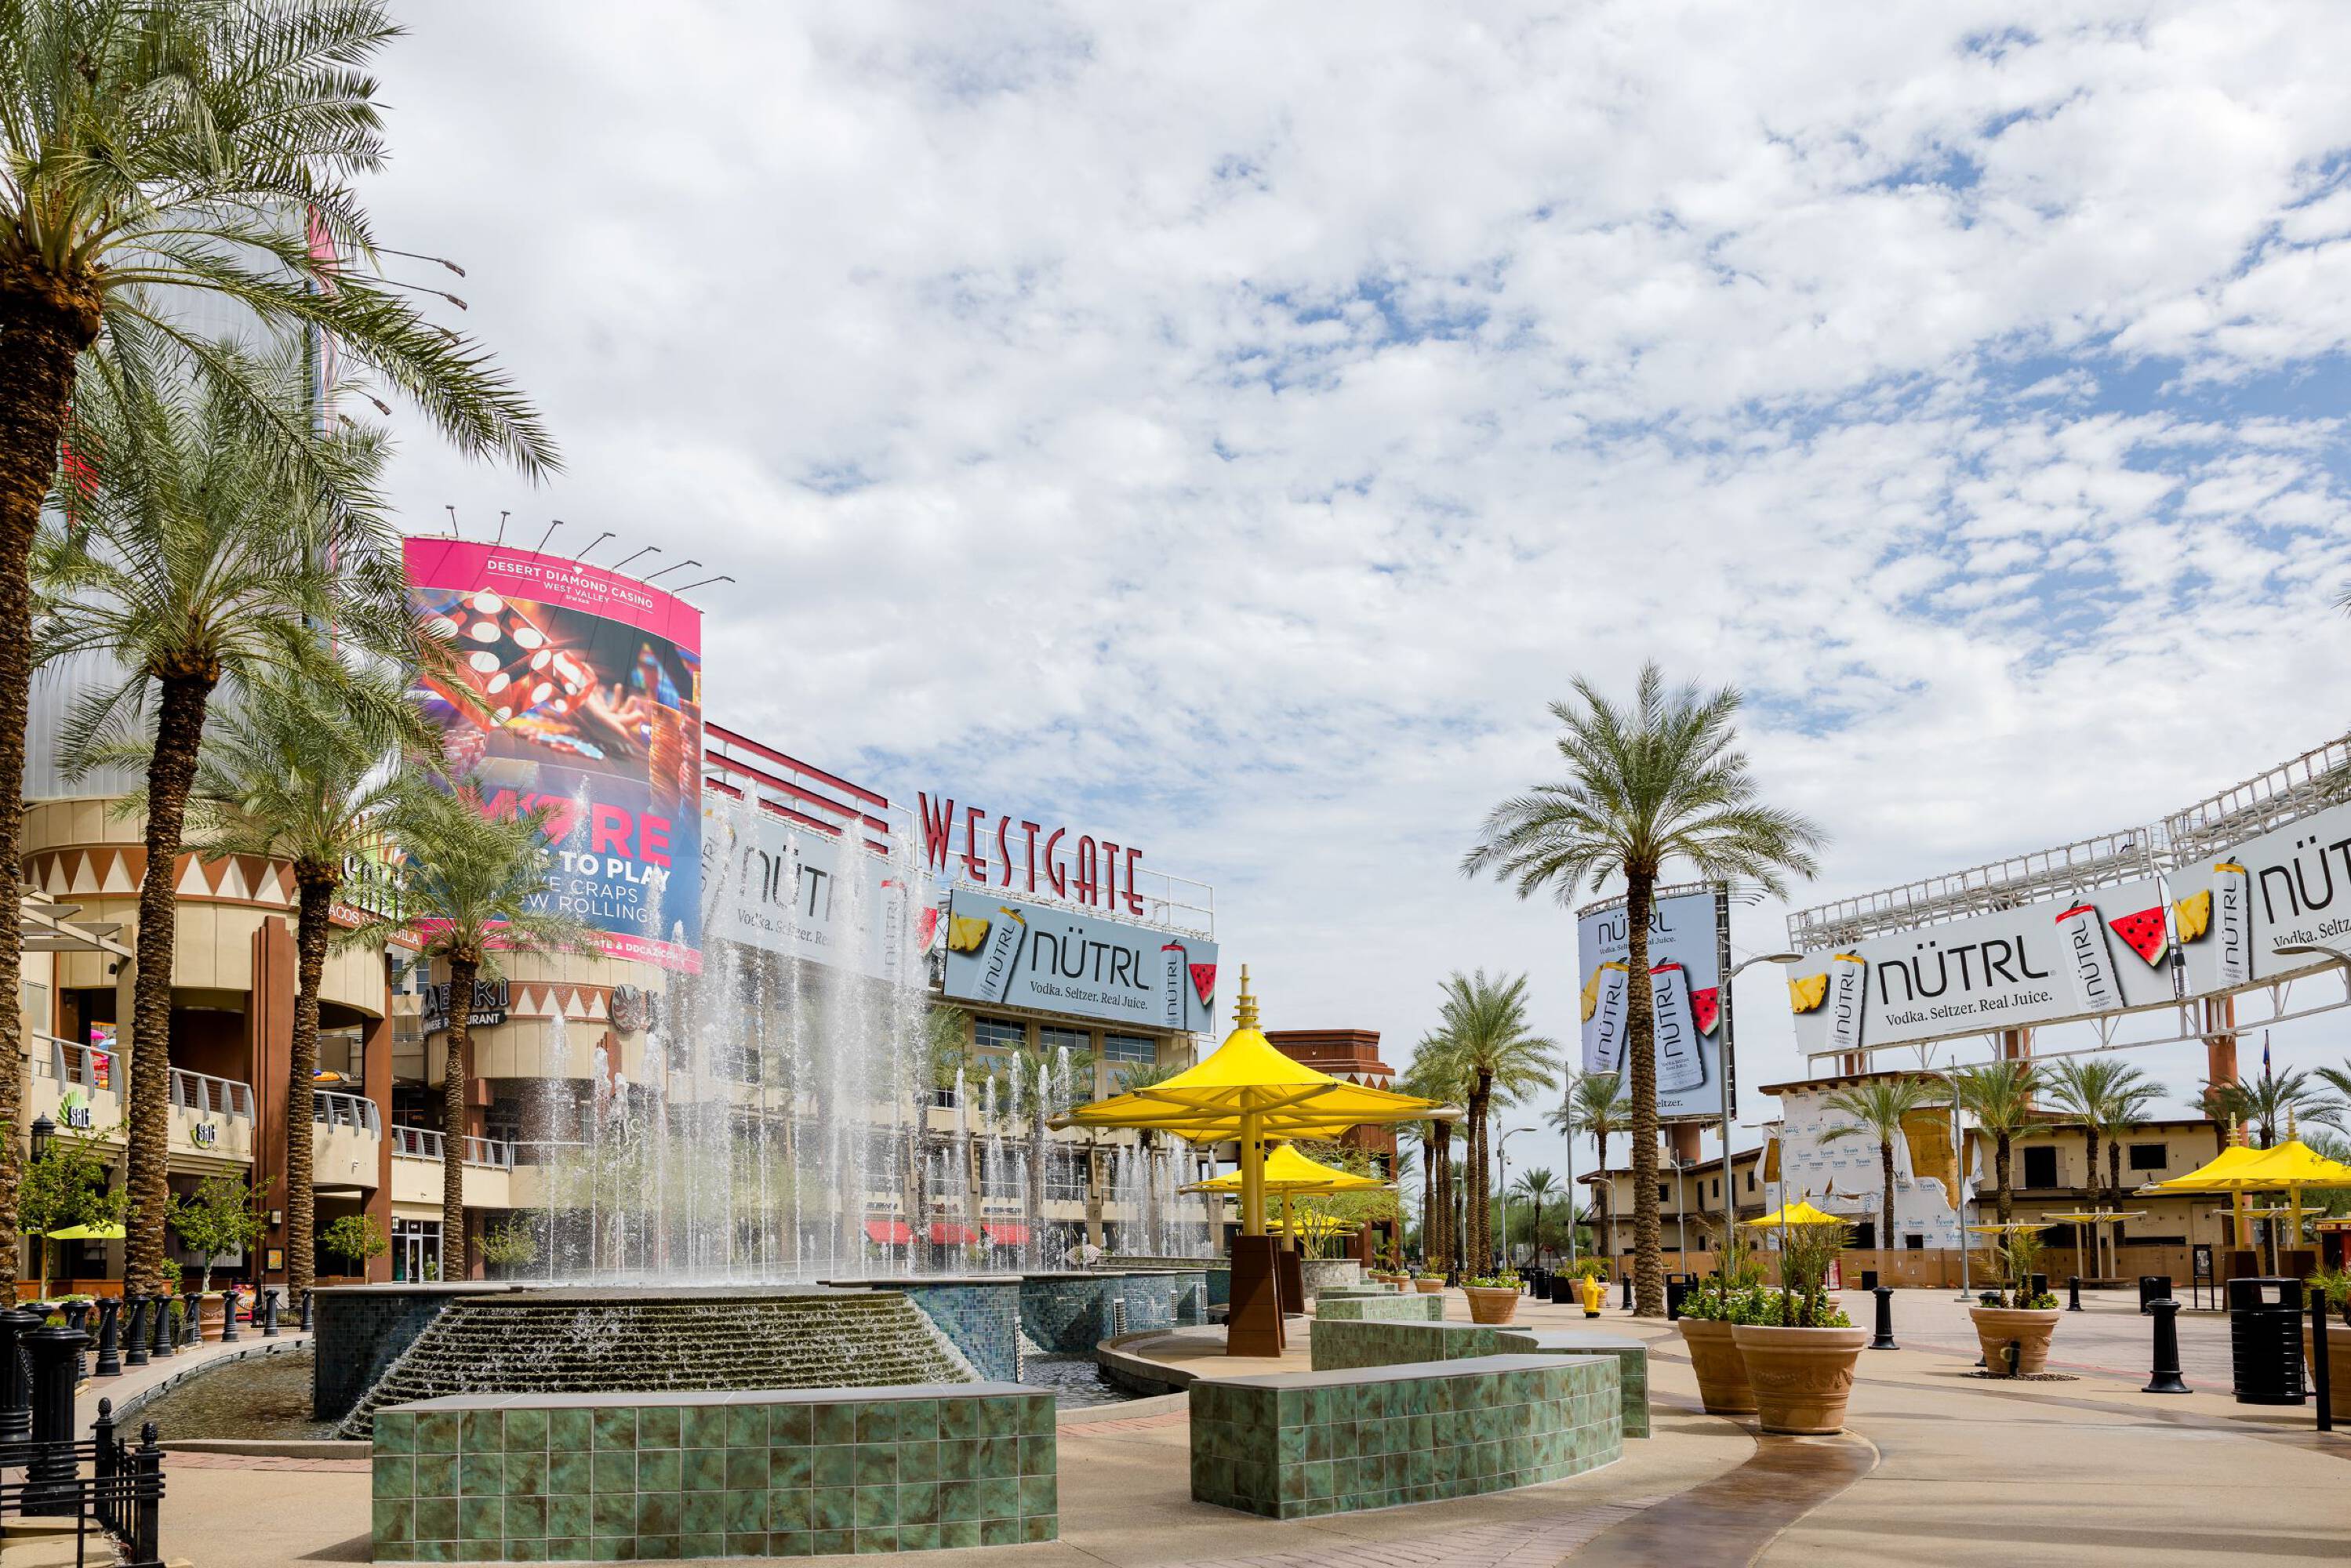 Glendale, Arizona, is a destination for sports, dining and entertainment